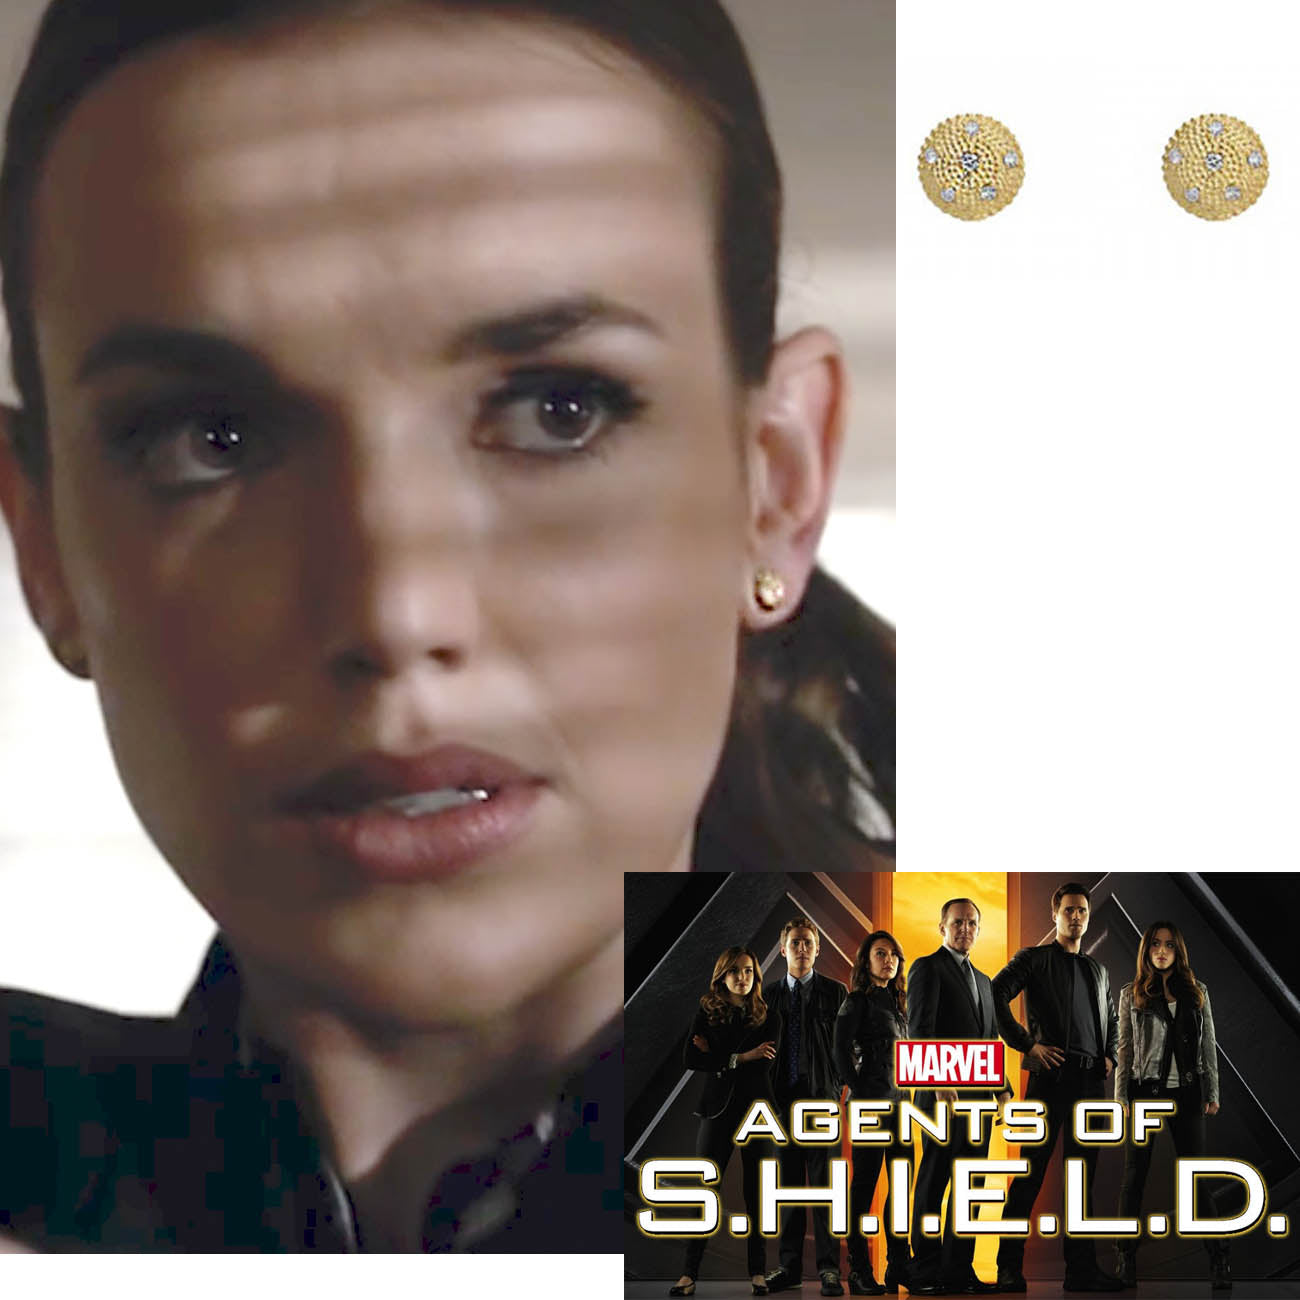 Agent Jemma Simmons from MARVEL Agents of S.H.I.E.L.D Super Shines in her Jewelry by Katrina Kelly